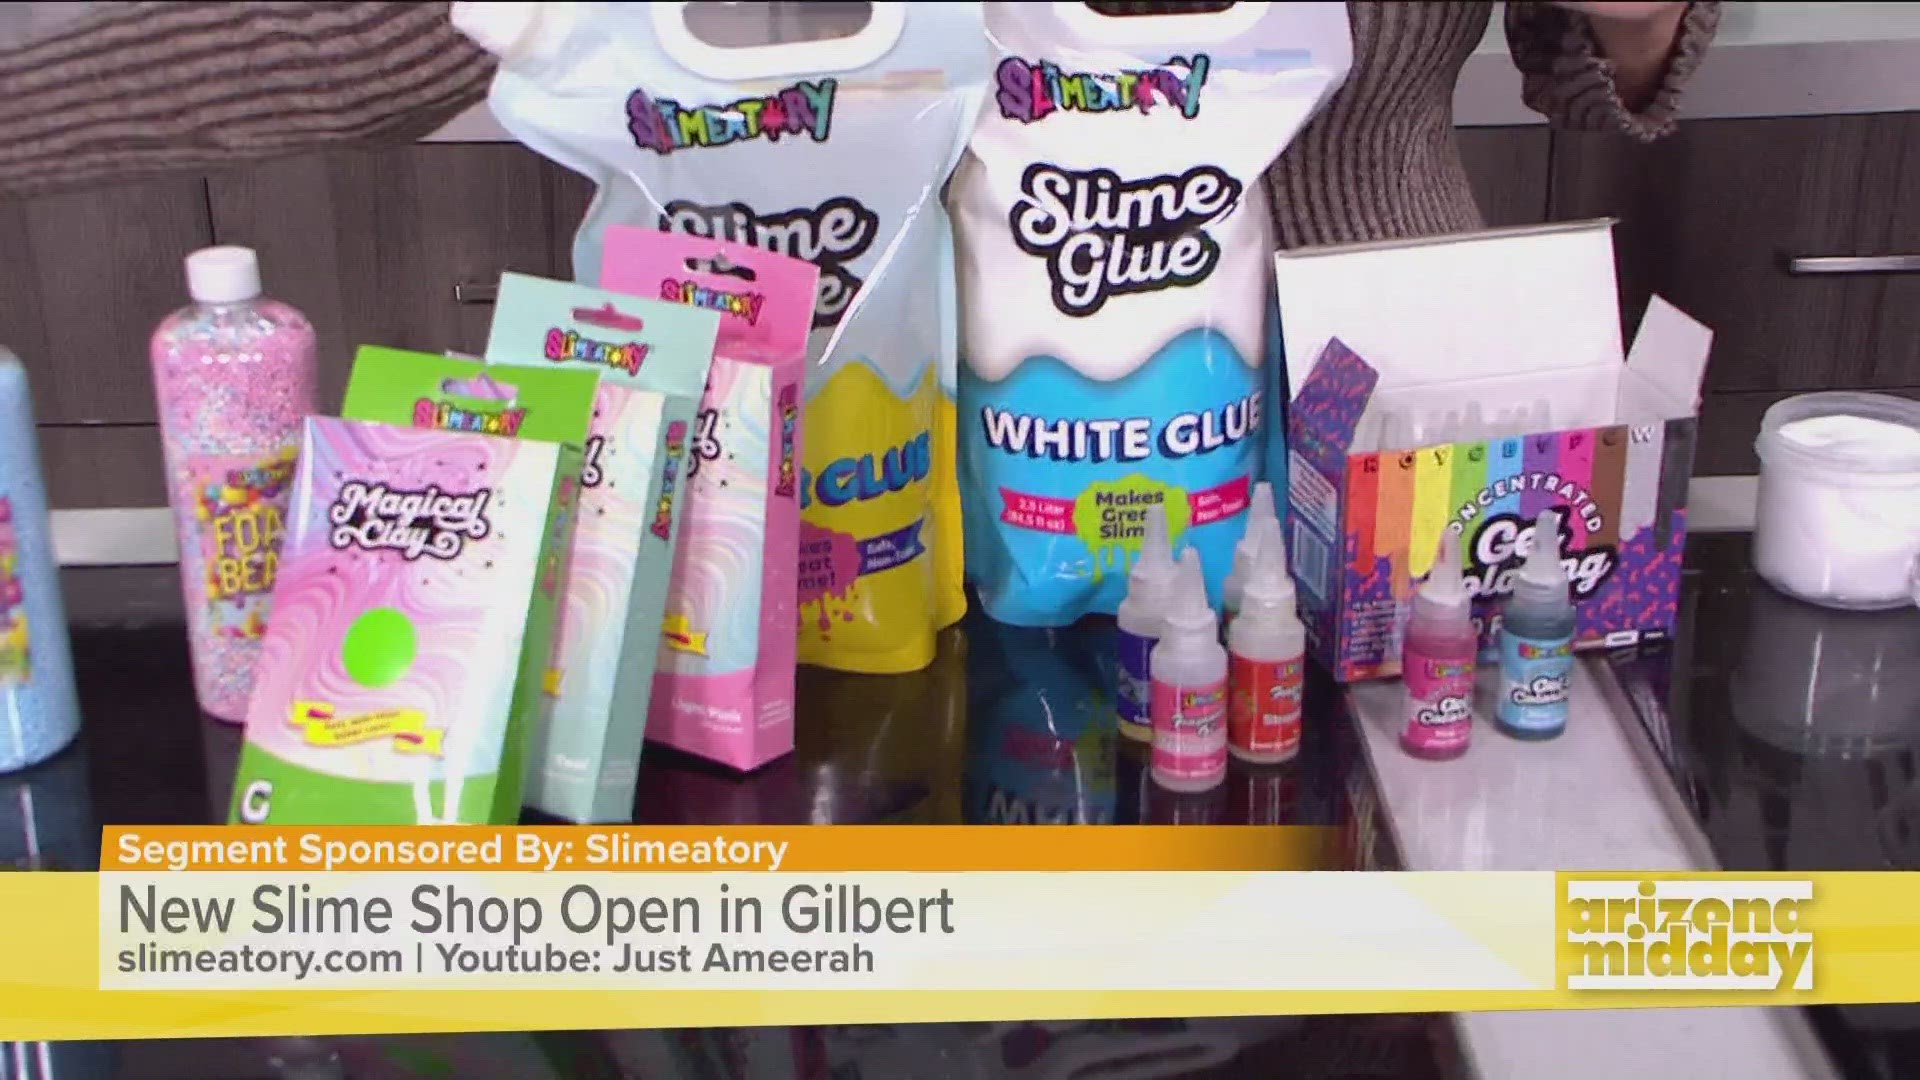 Slime maker and YouTuber Ameerah Navalua opens a new store in Gilbert that slime enthusiasts will love!